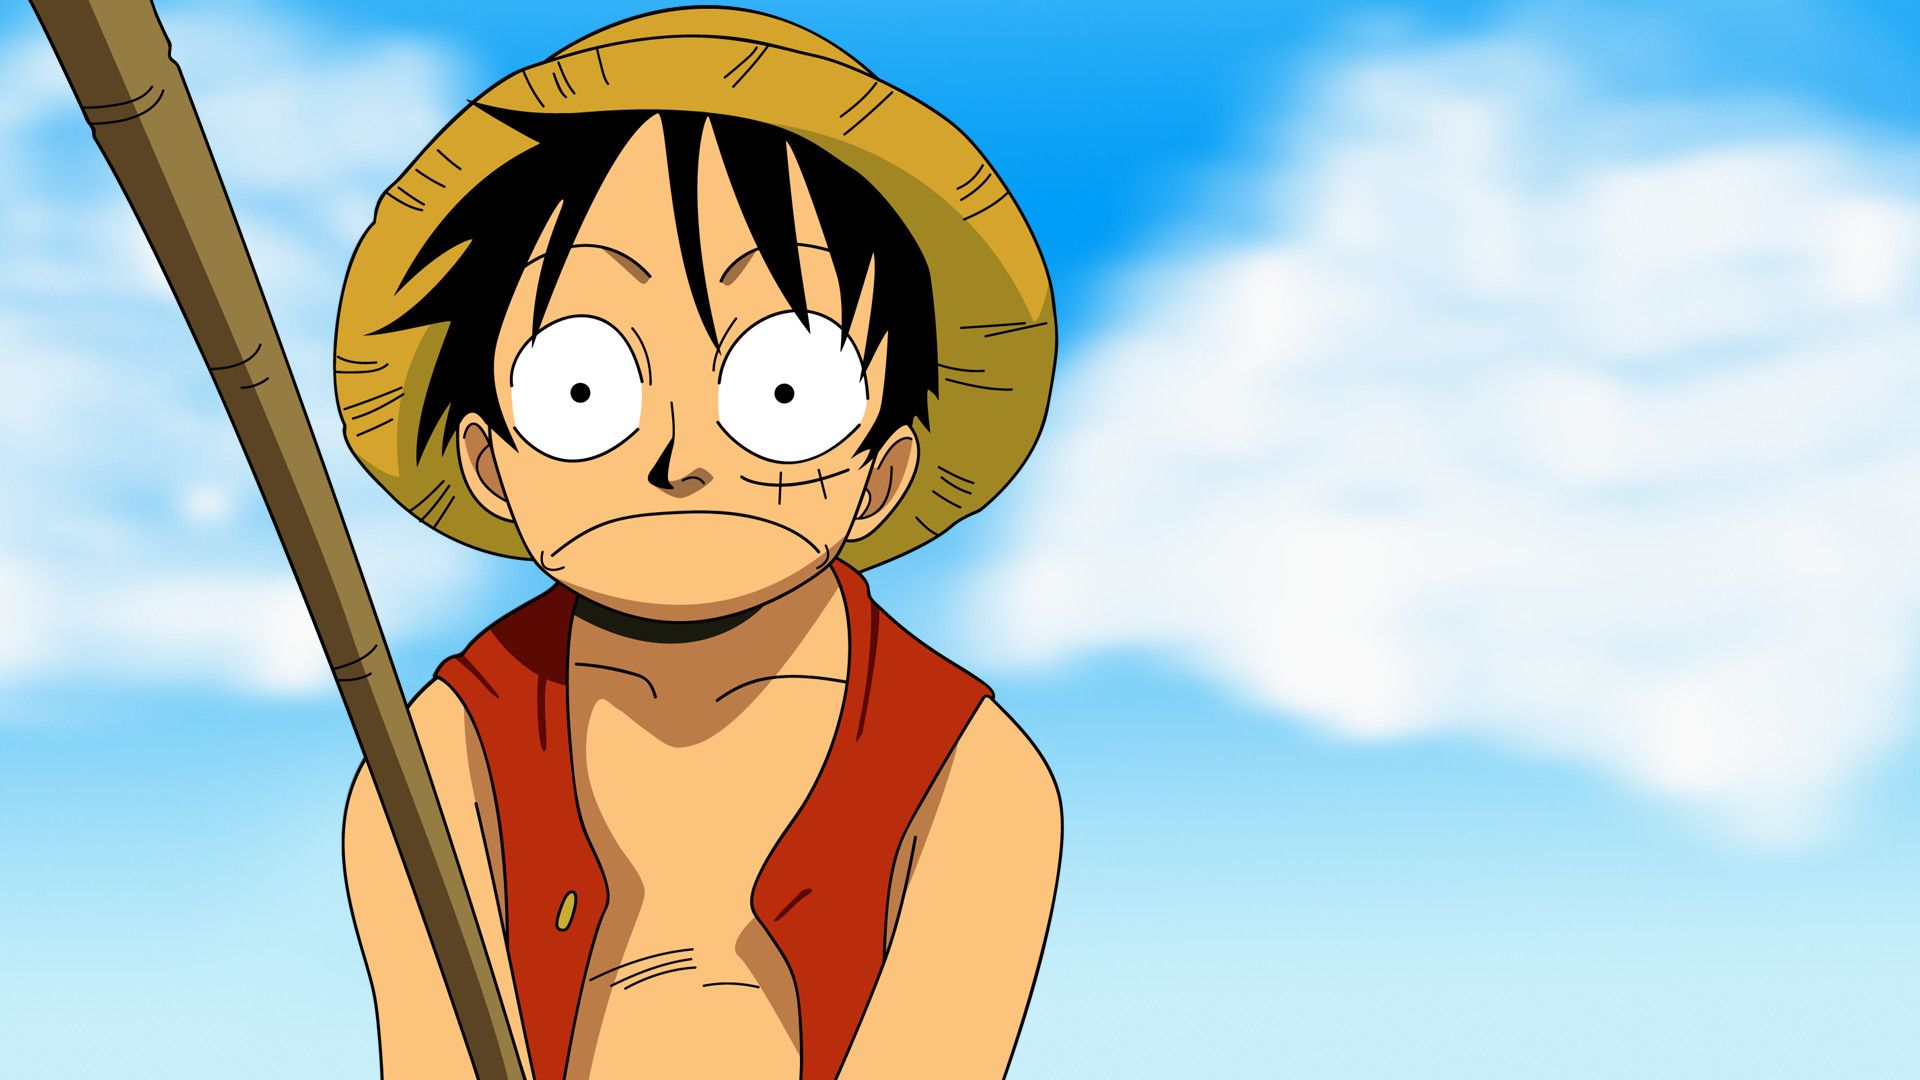 Luffy frown, wallpaper. One piece luffy, Anime, Manga anime one piece